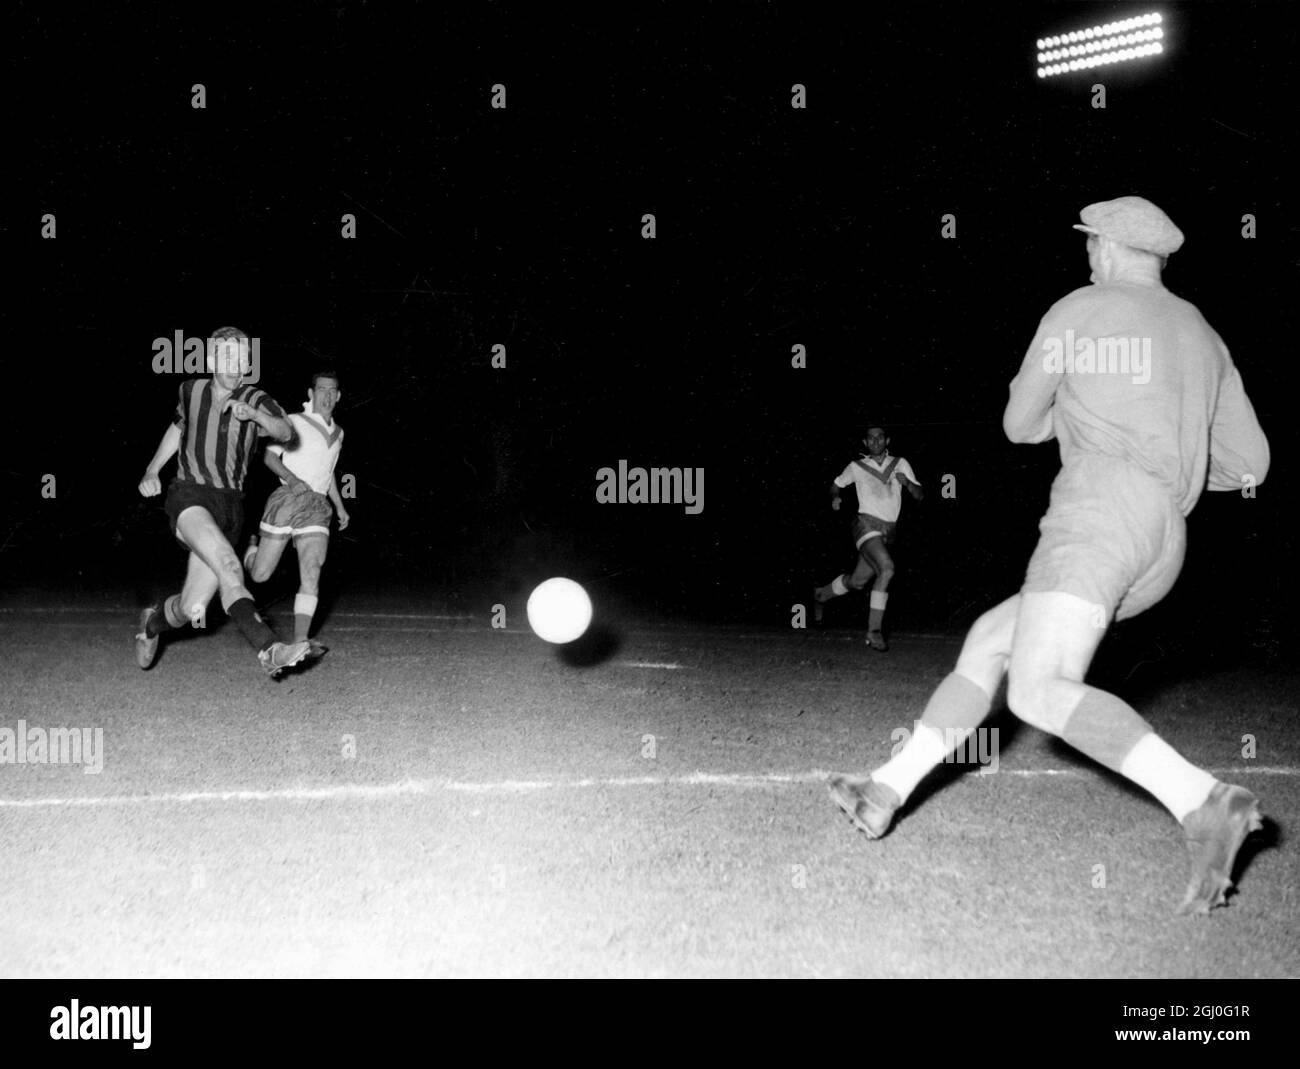 AC Milan v Dynamo Kiev Gerry Hitchens scores a goal for Milan in their 4-0 win over Dynamo Kiev of Russia. 17th August 1961 Stock Photo